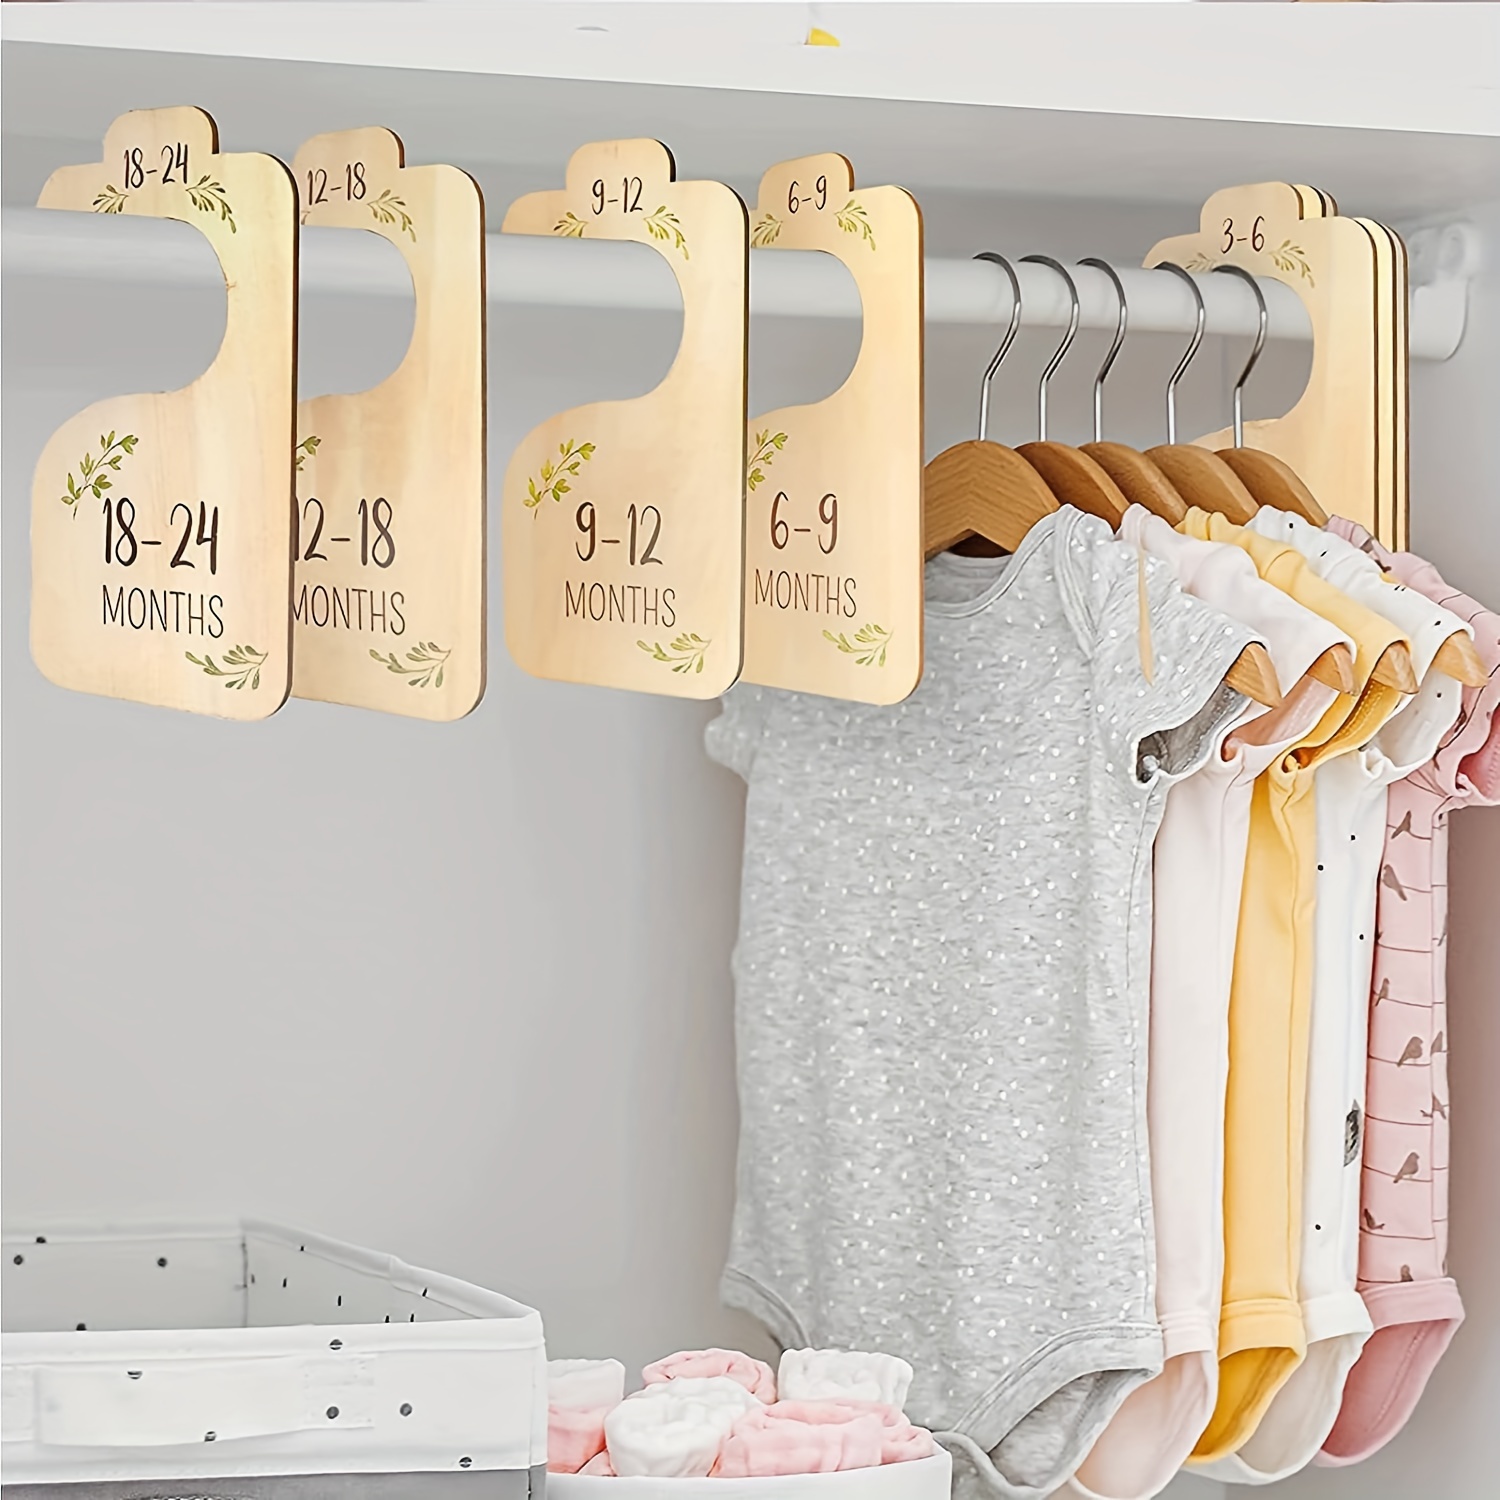 CORALMEE Wooden Baby Closet Dividers 8Pcs Mauve Tones Closet Dividers for  Baby Clothes Organizer Double-Sided Organizer for Newborn to 24 Months  Colorful Nursery Decor for Closet Size Hangers - Yahoo Shopping